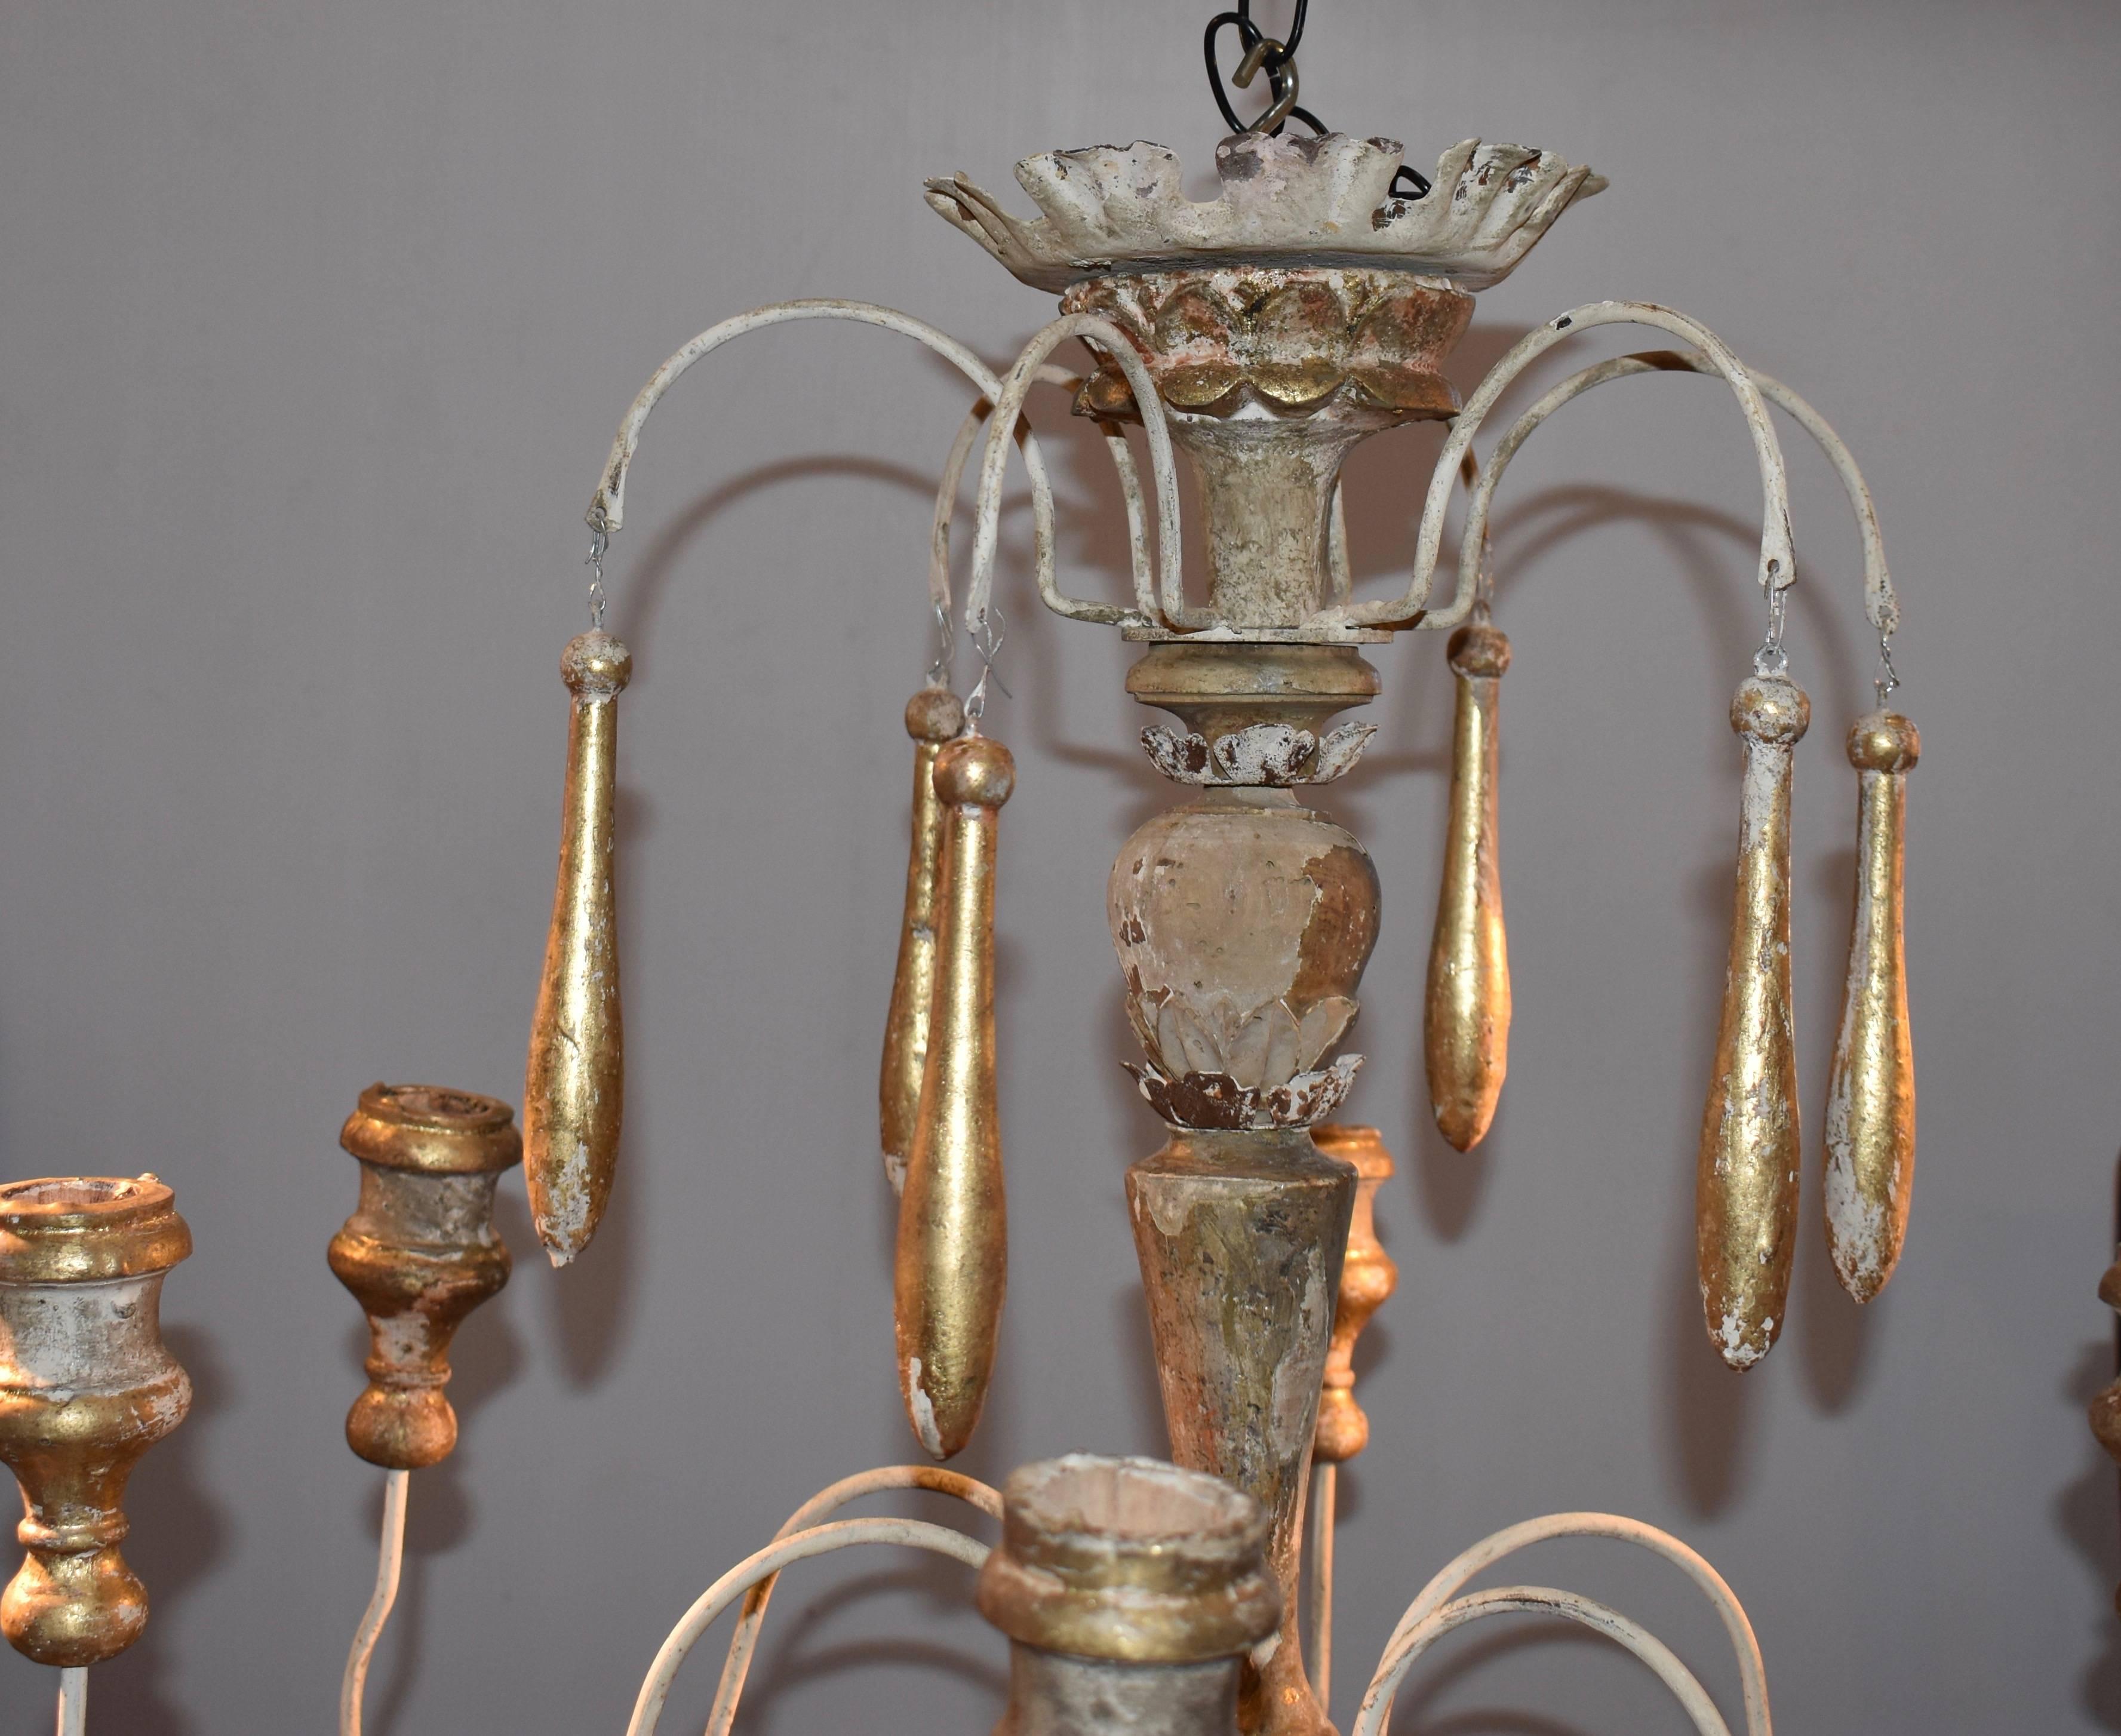 Beautiful wooden chandelier made from 18th century Italian church candlesticks. Great aged patina. Lovely cream white color with hints of aged gilded gold. Not yet wired.